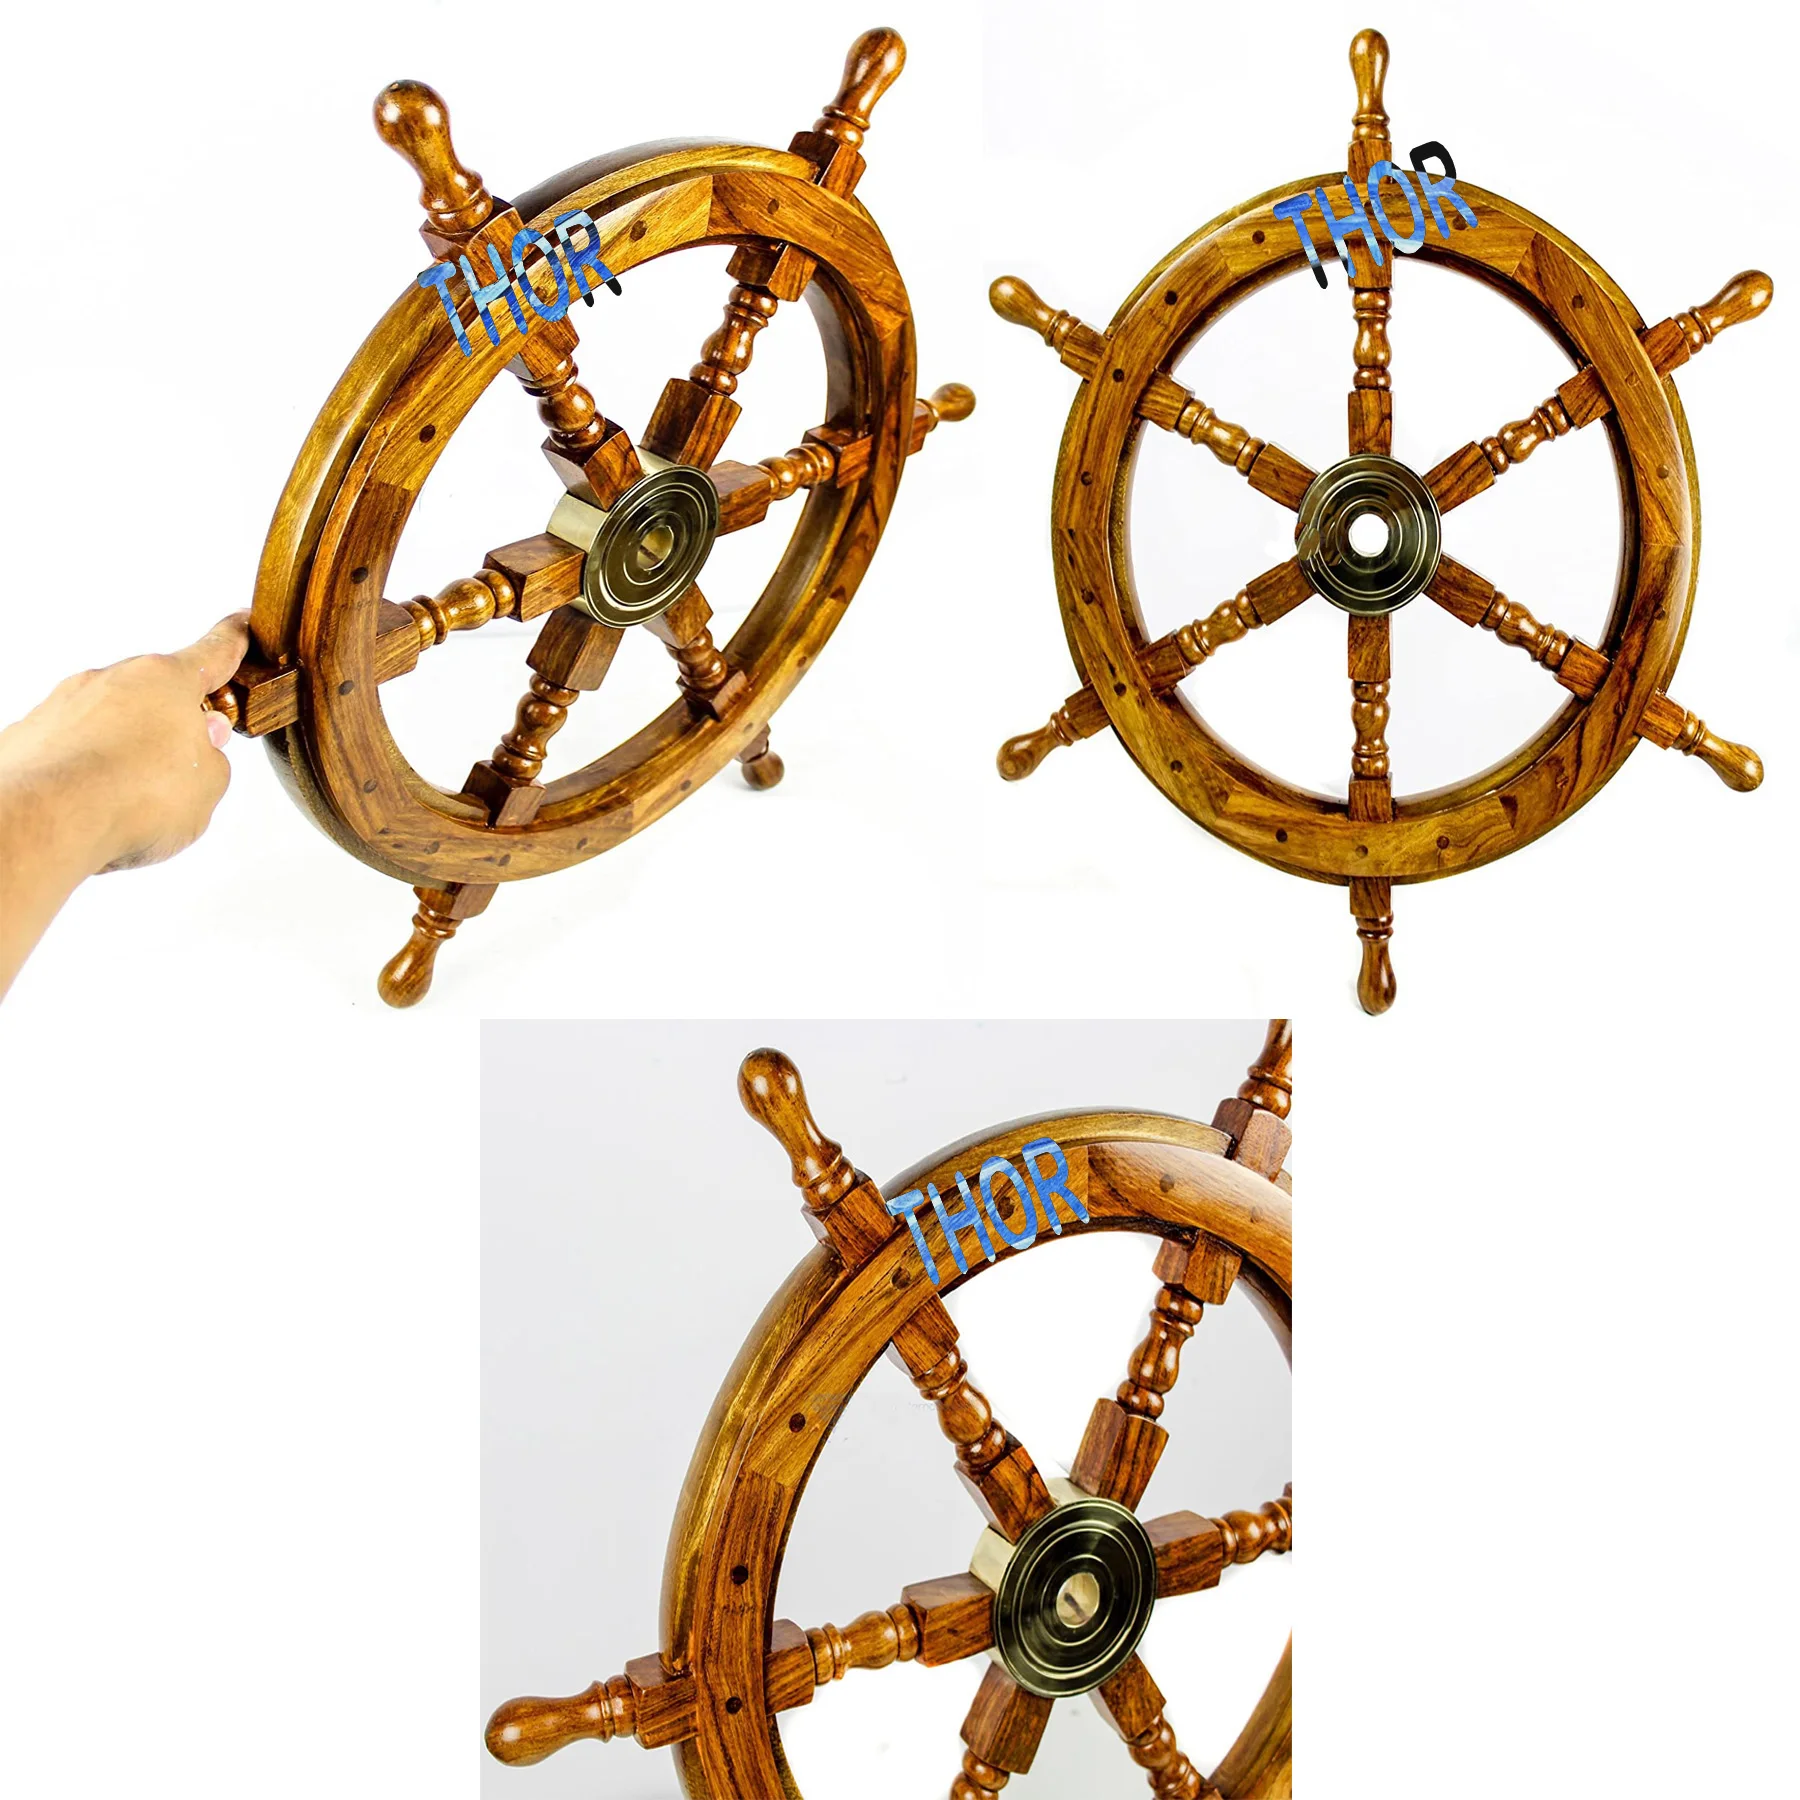 18" Vintage Boat Ship Steering Wheel Brass Wooden Decor Nautical Pirate Gift 